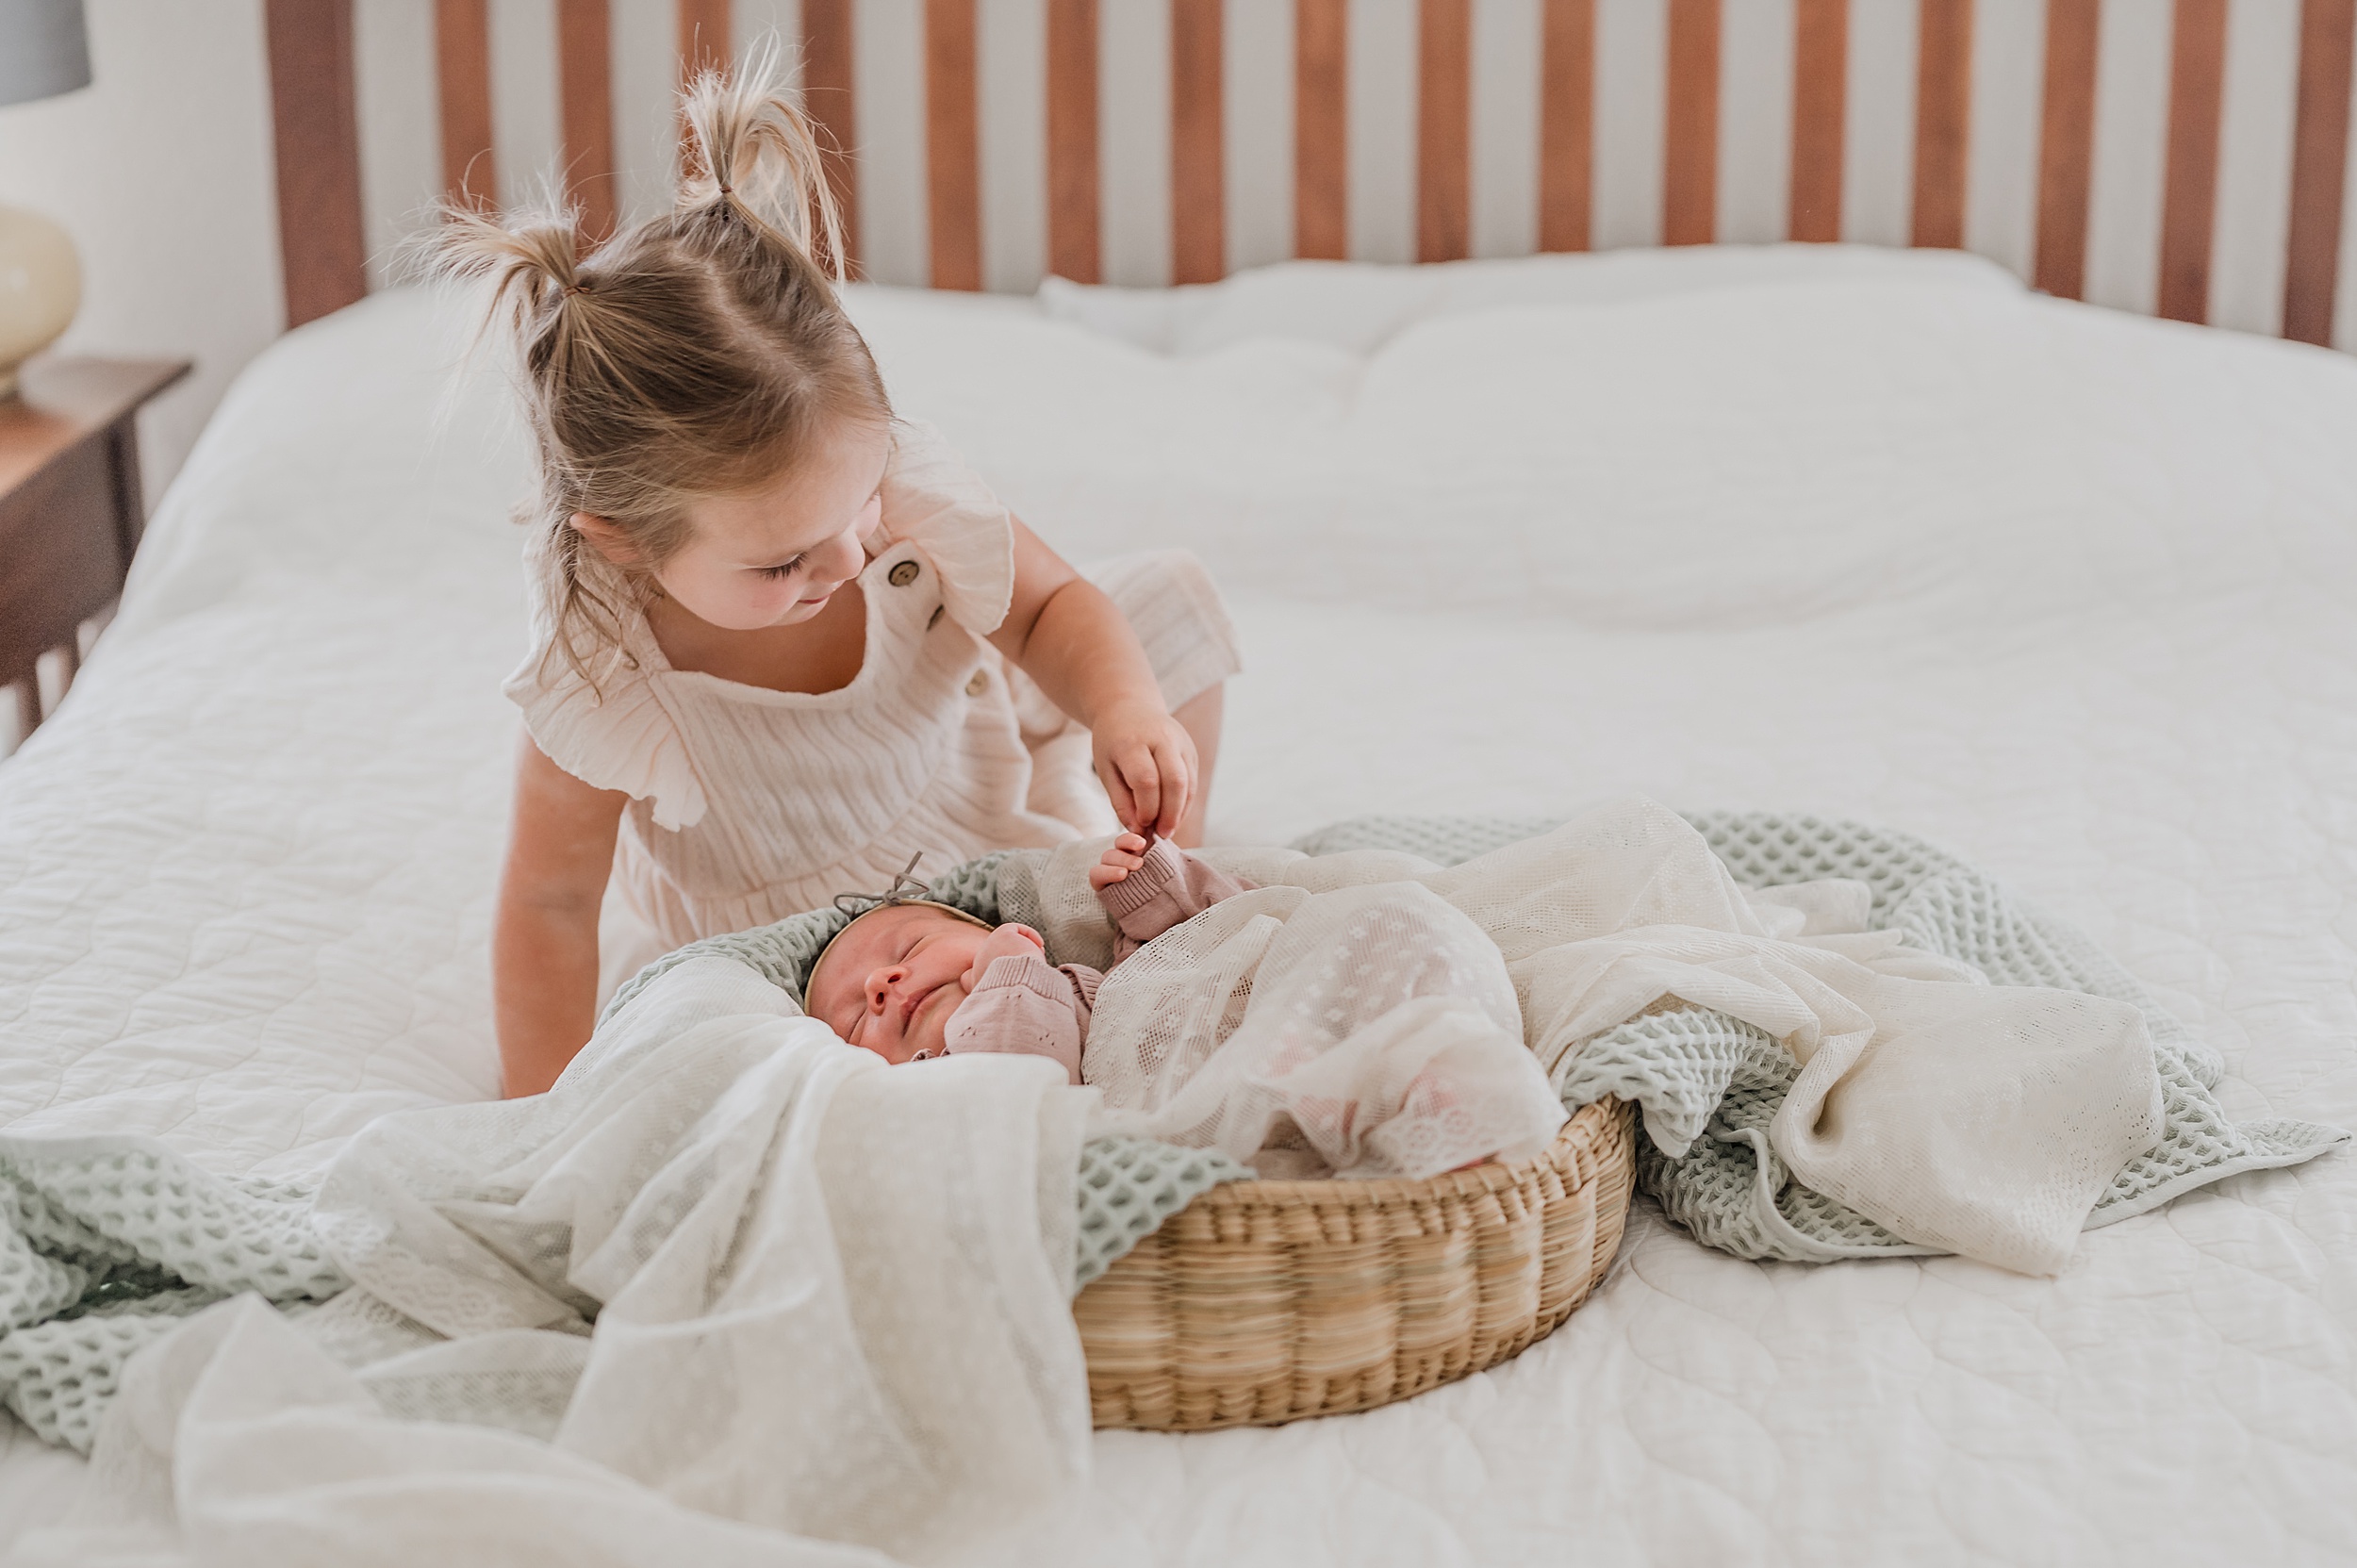 A newborn baby sleeps in a basket full of blankets while her toddler big sister holds her hand on a bed